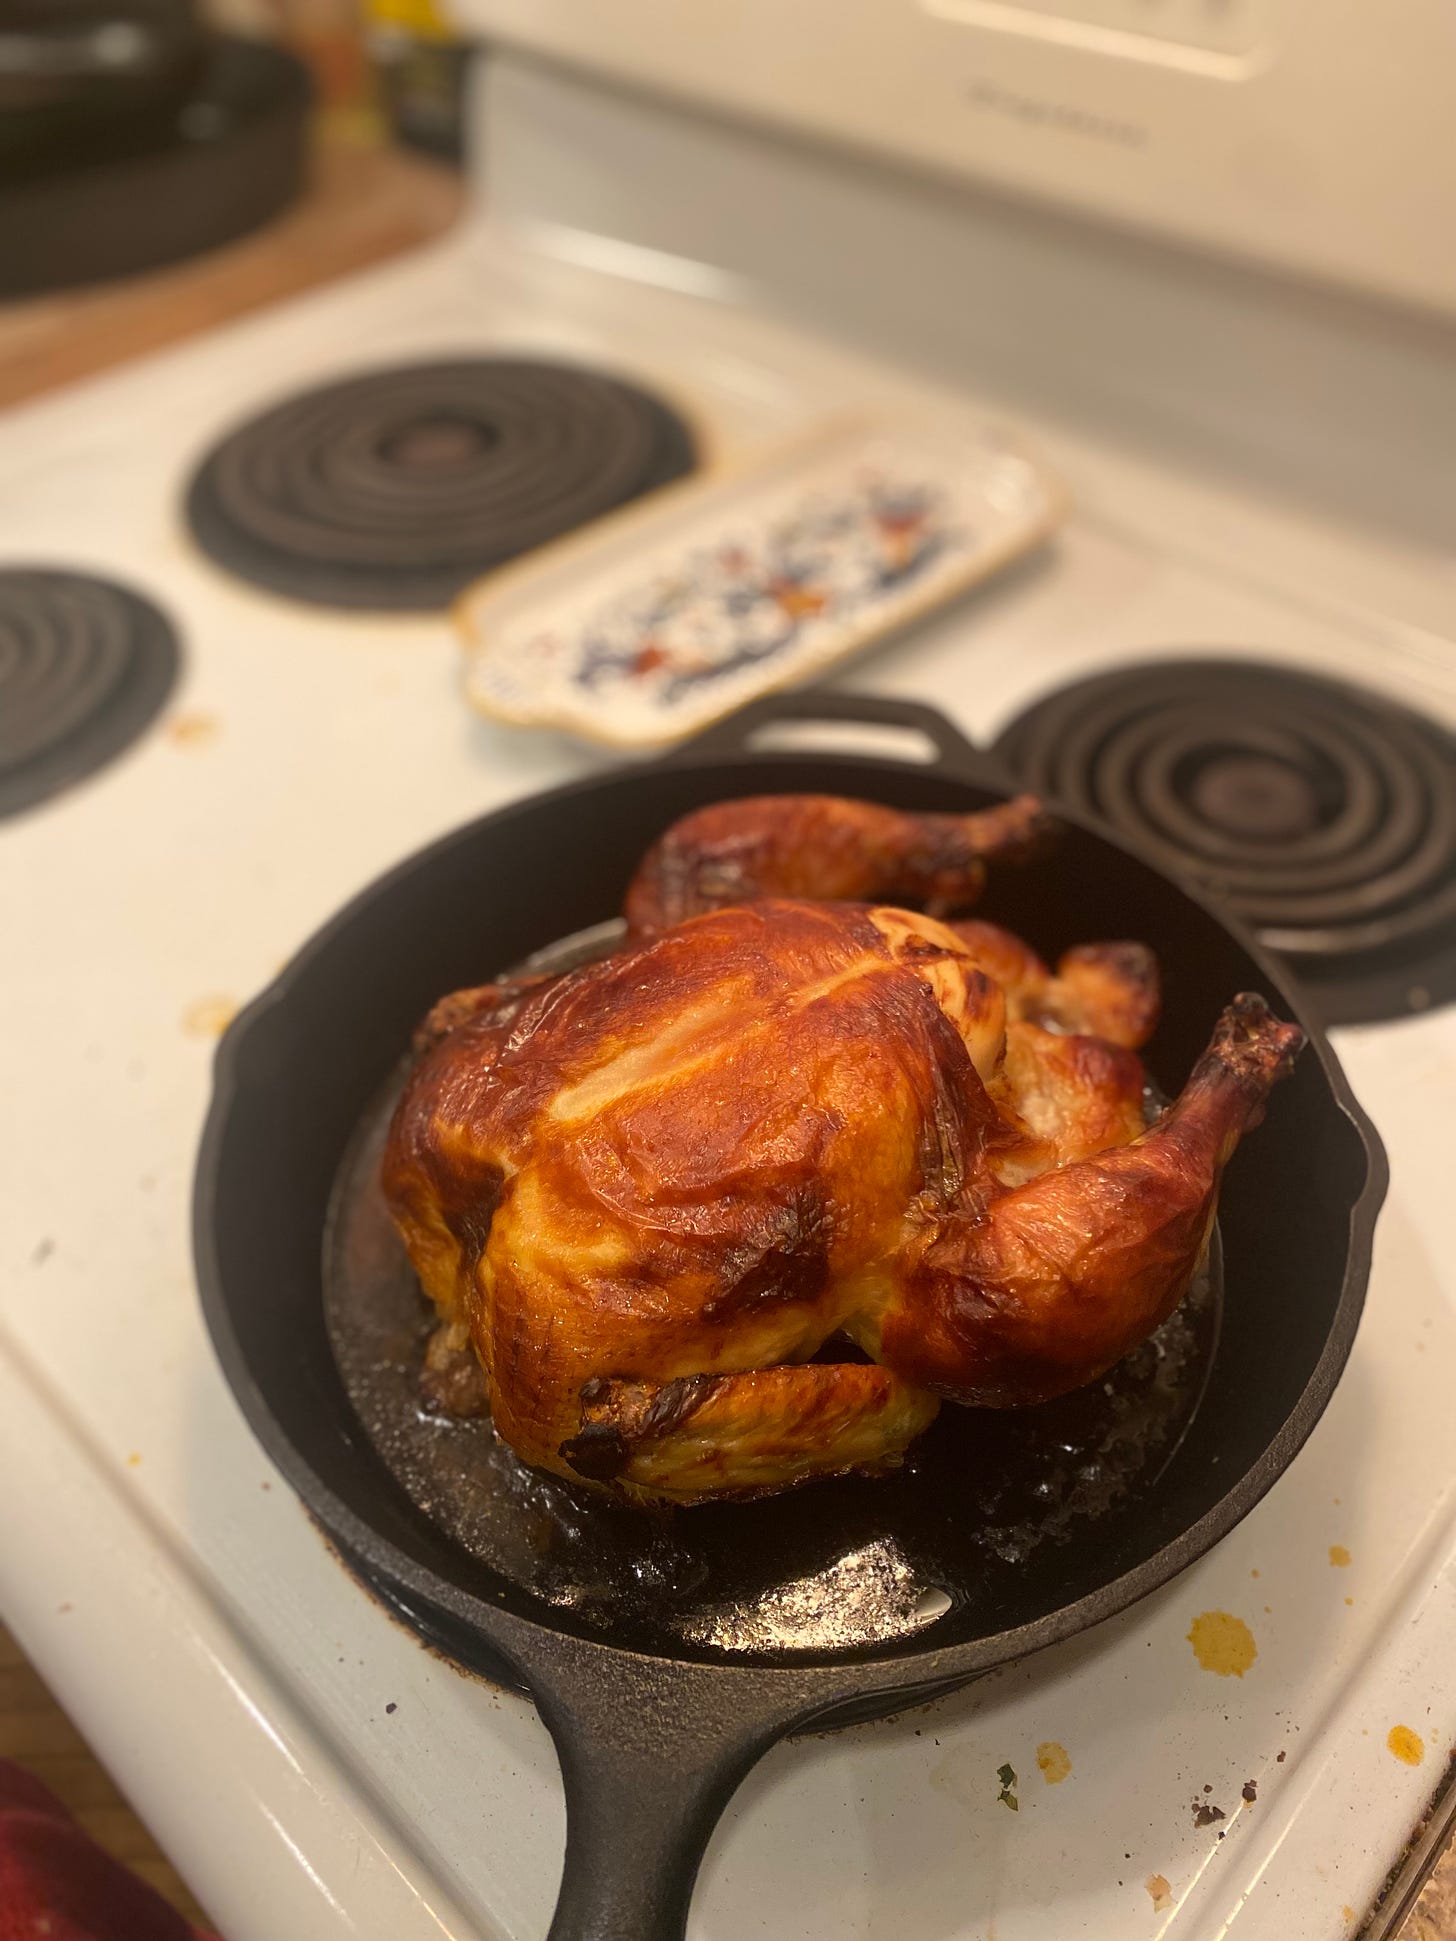 In a cast iron pan is a roast chicken with crispy, caramelized skin, the drippings shining in the bottom of the pan. The stove it's resting on is a bit messy.